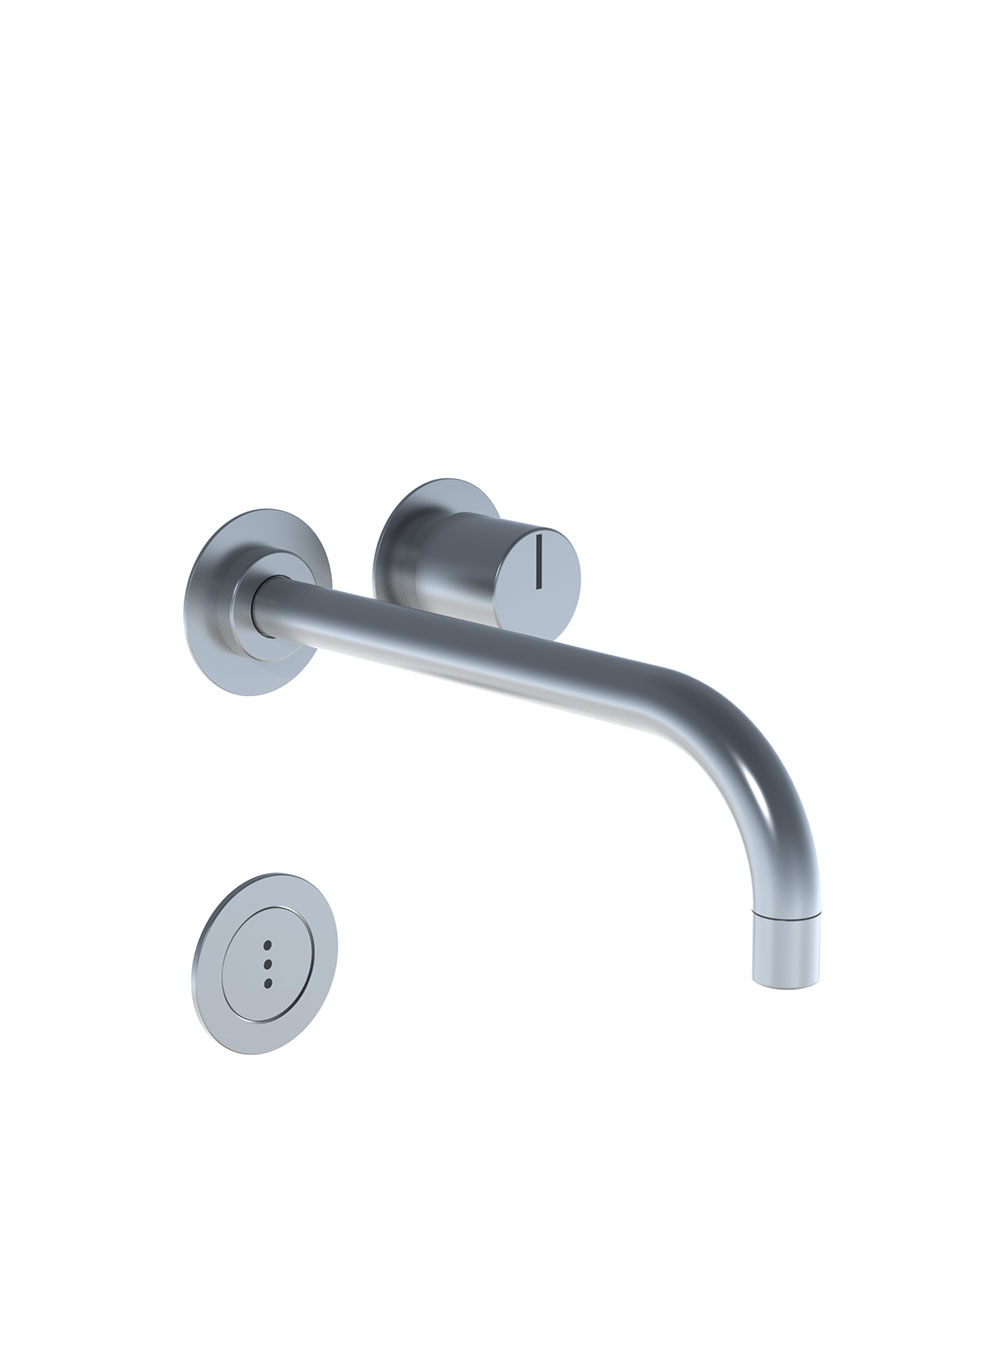 4921VSX: Build-in basin mixer with on-off sensor for ‘hands free’ operation. For vertical mounting. Sensor...